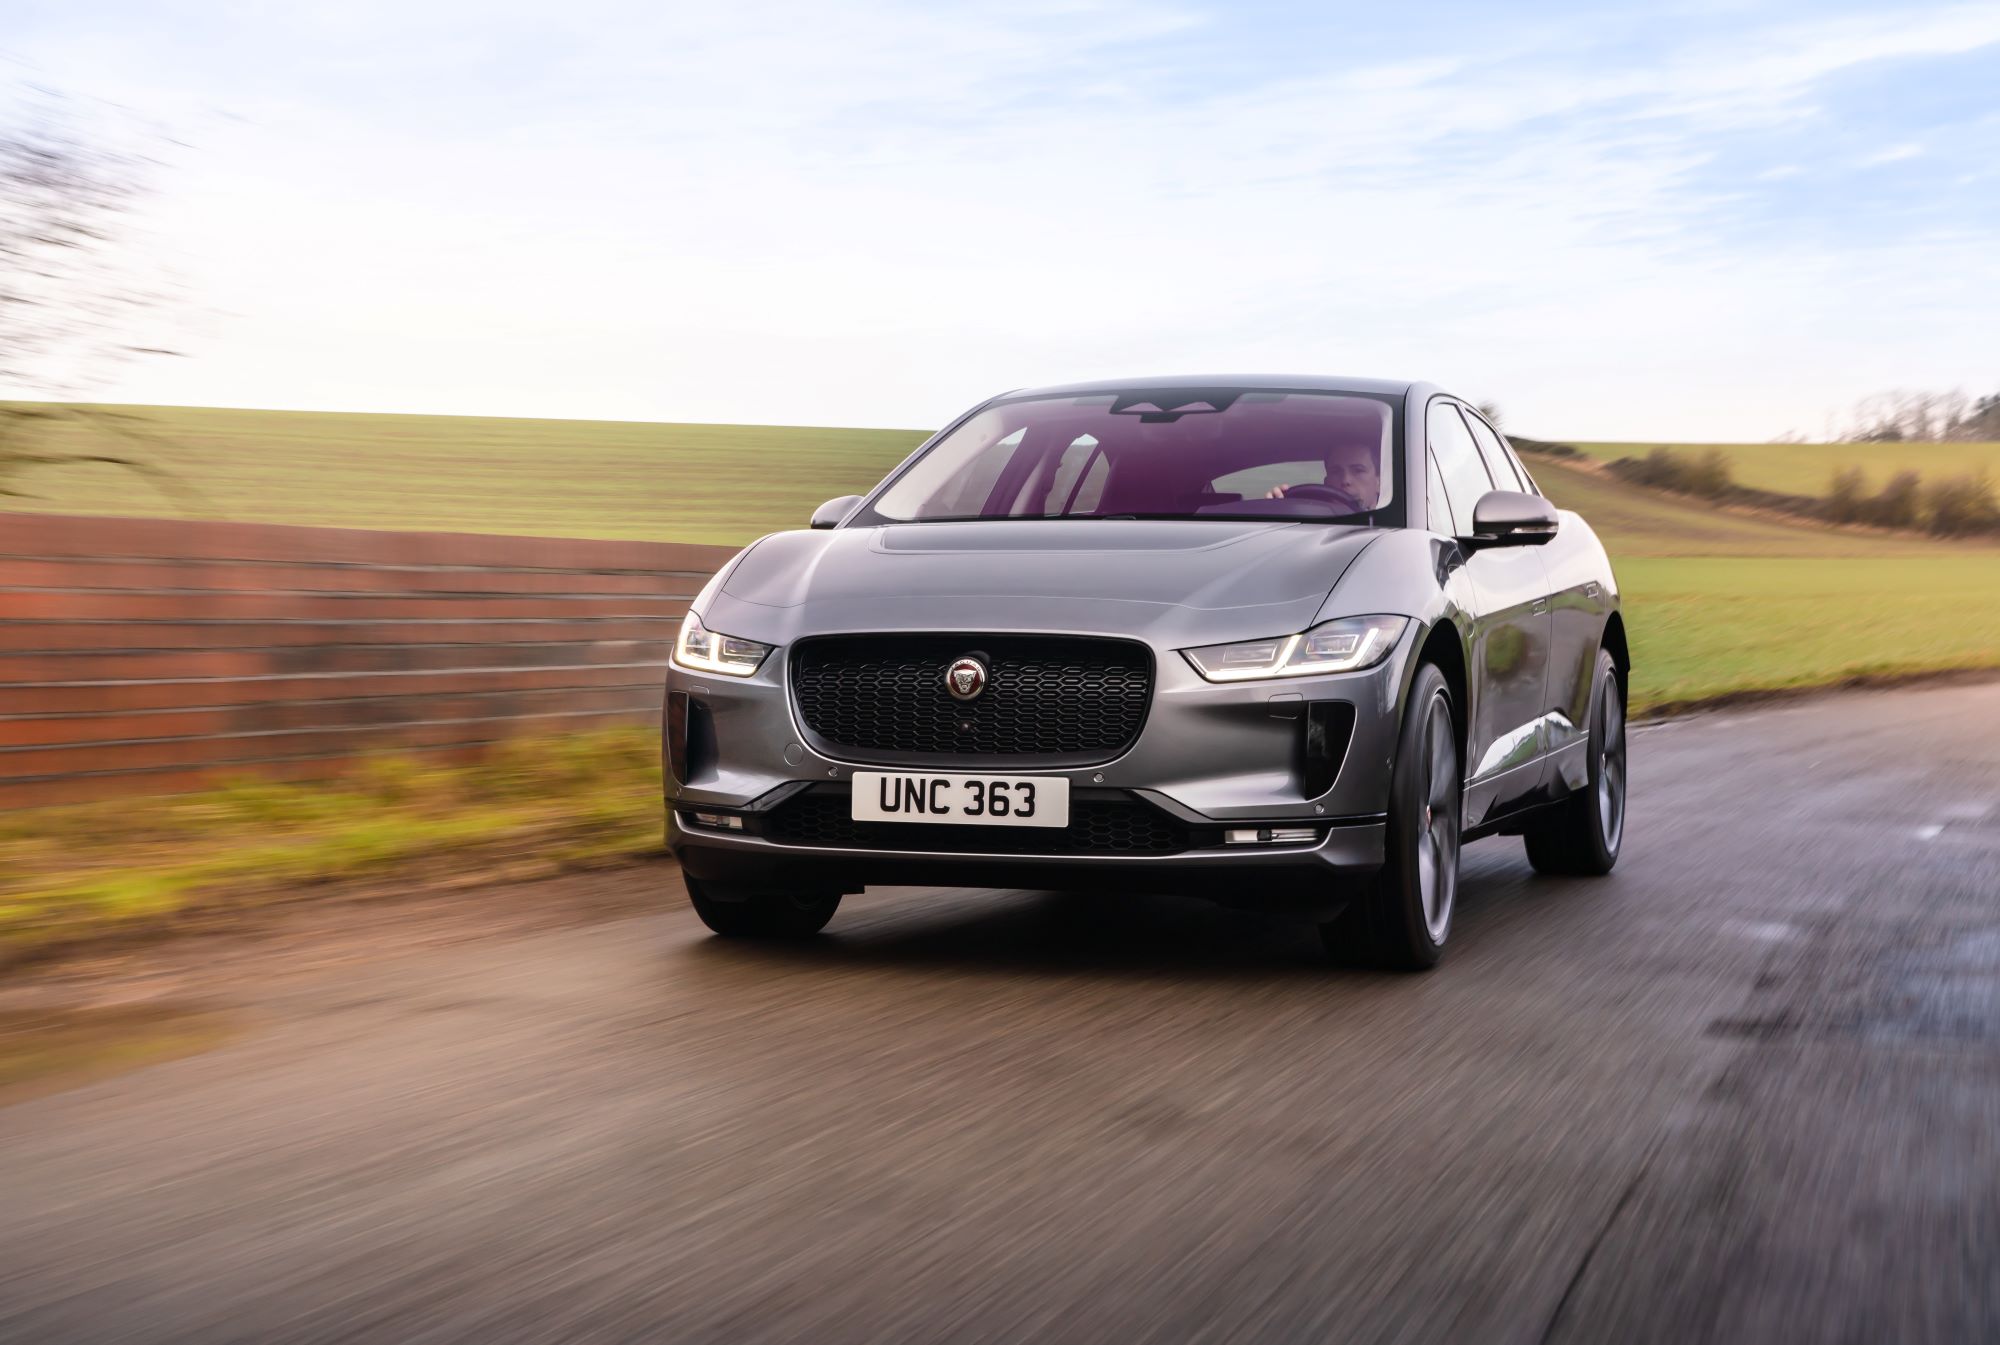 A silver Jaguar I-Pace driving on a highway with a background of green plains.